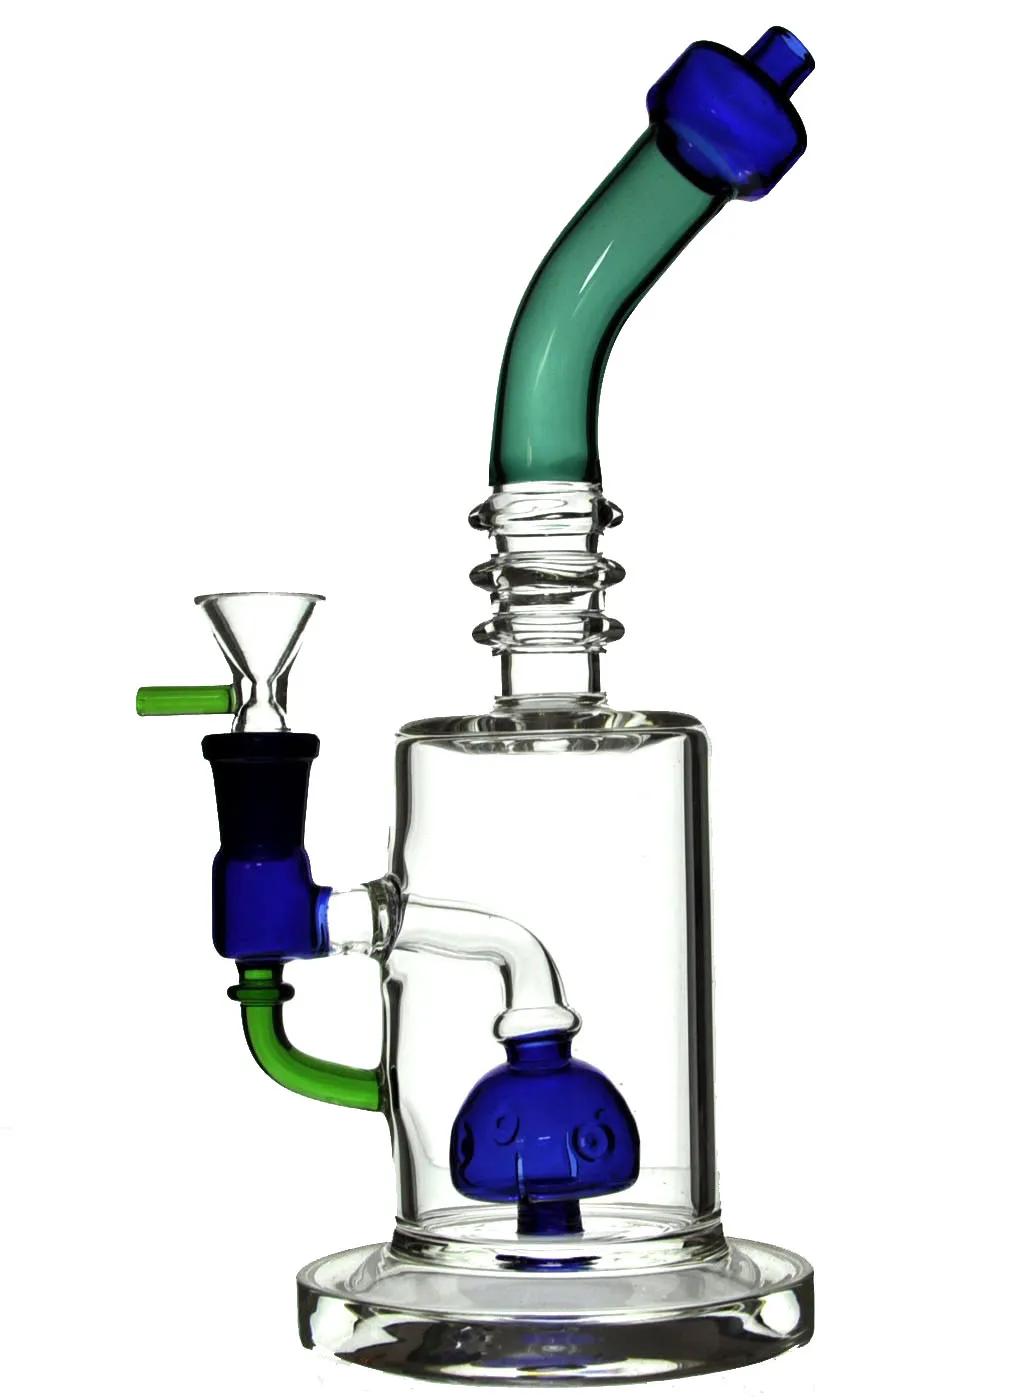 10 Inch Glas Bong Mushroom Filter Recycler Rigs DAB RUG 14MM GEAMENDE ROKALE WATER PIPIES TURBINE PERCOLATOR Assorted Color Glass Bongs